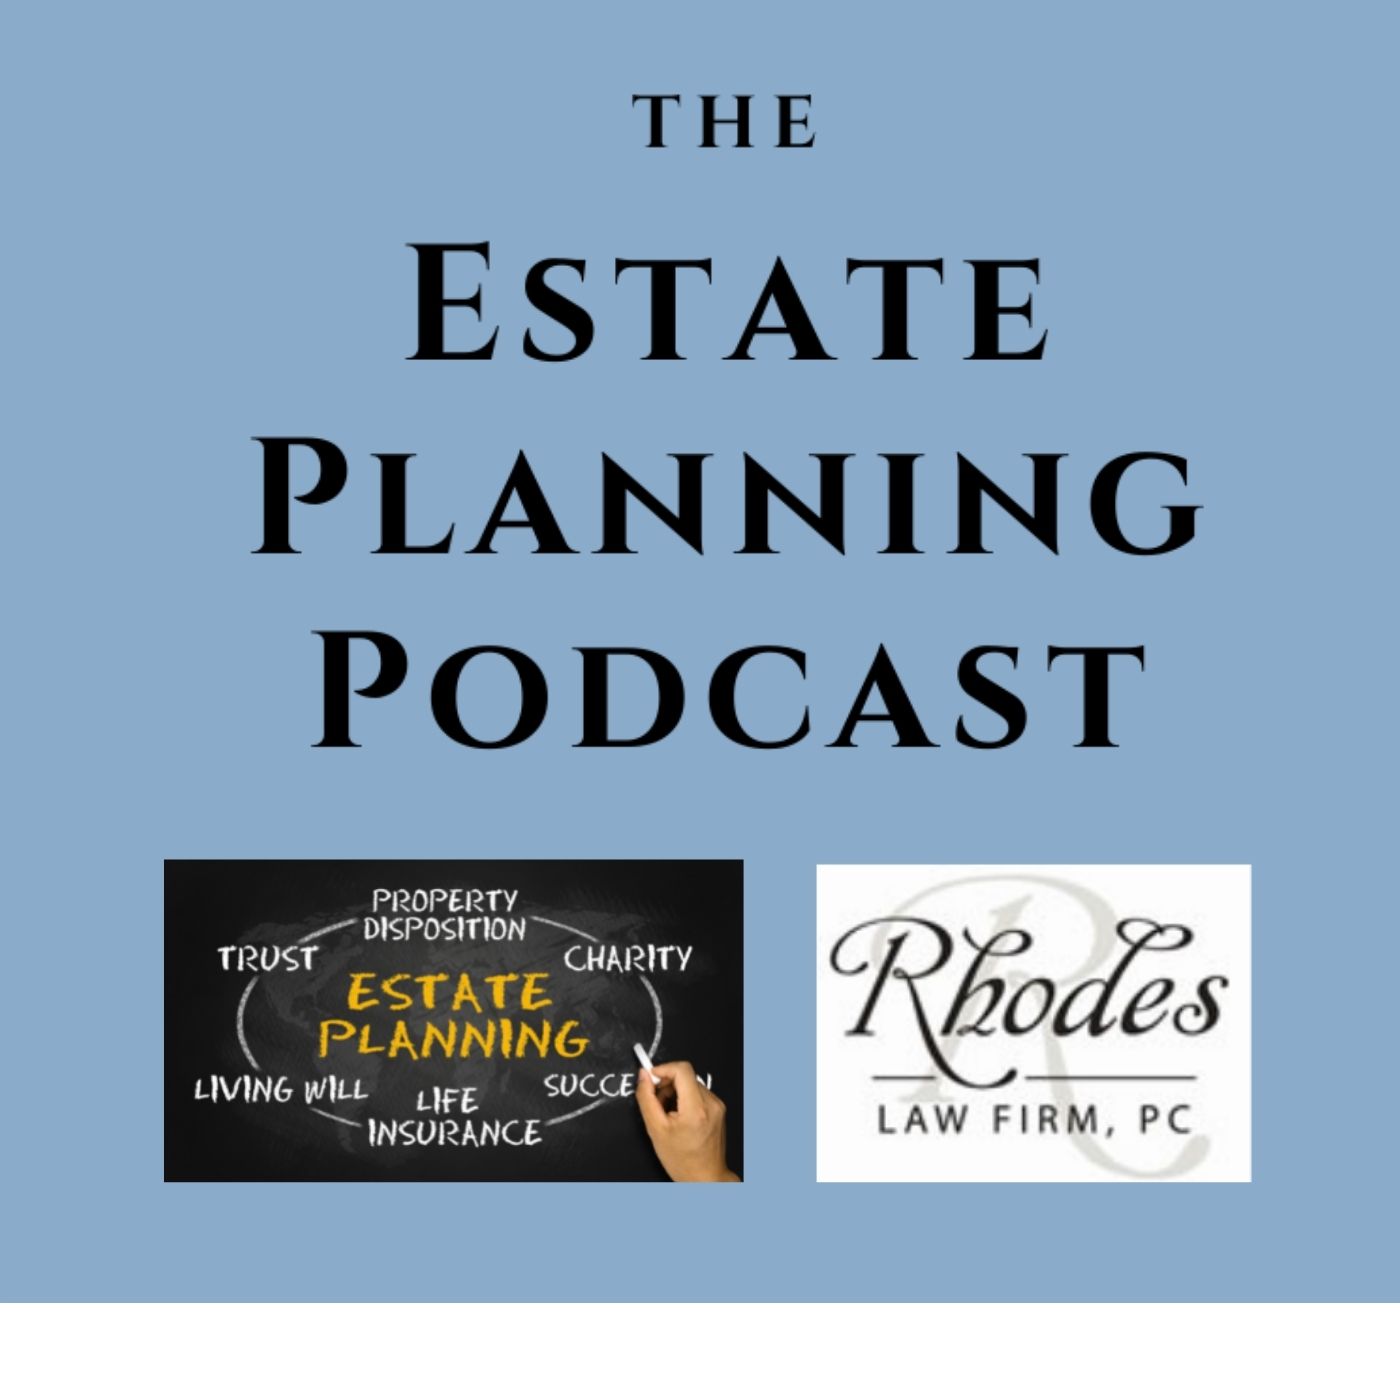 The Estate Planning Podcast